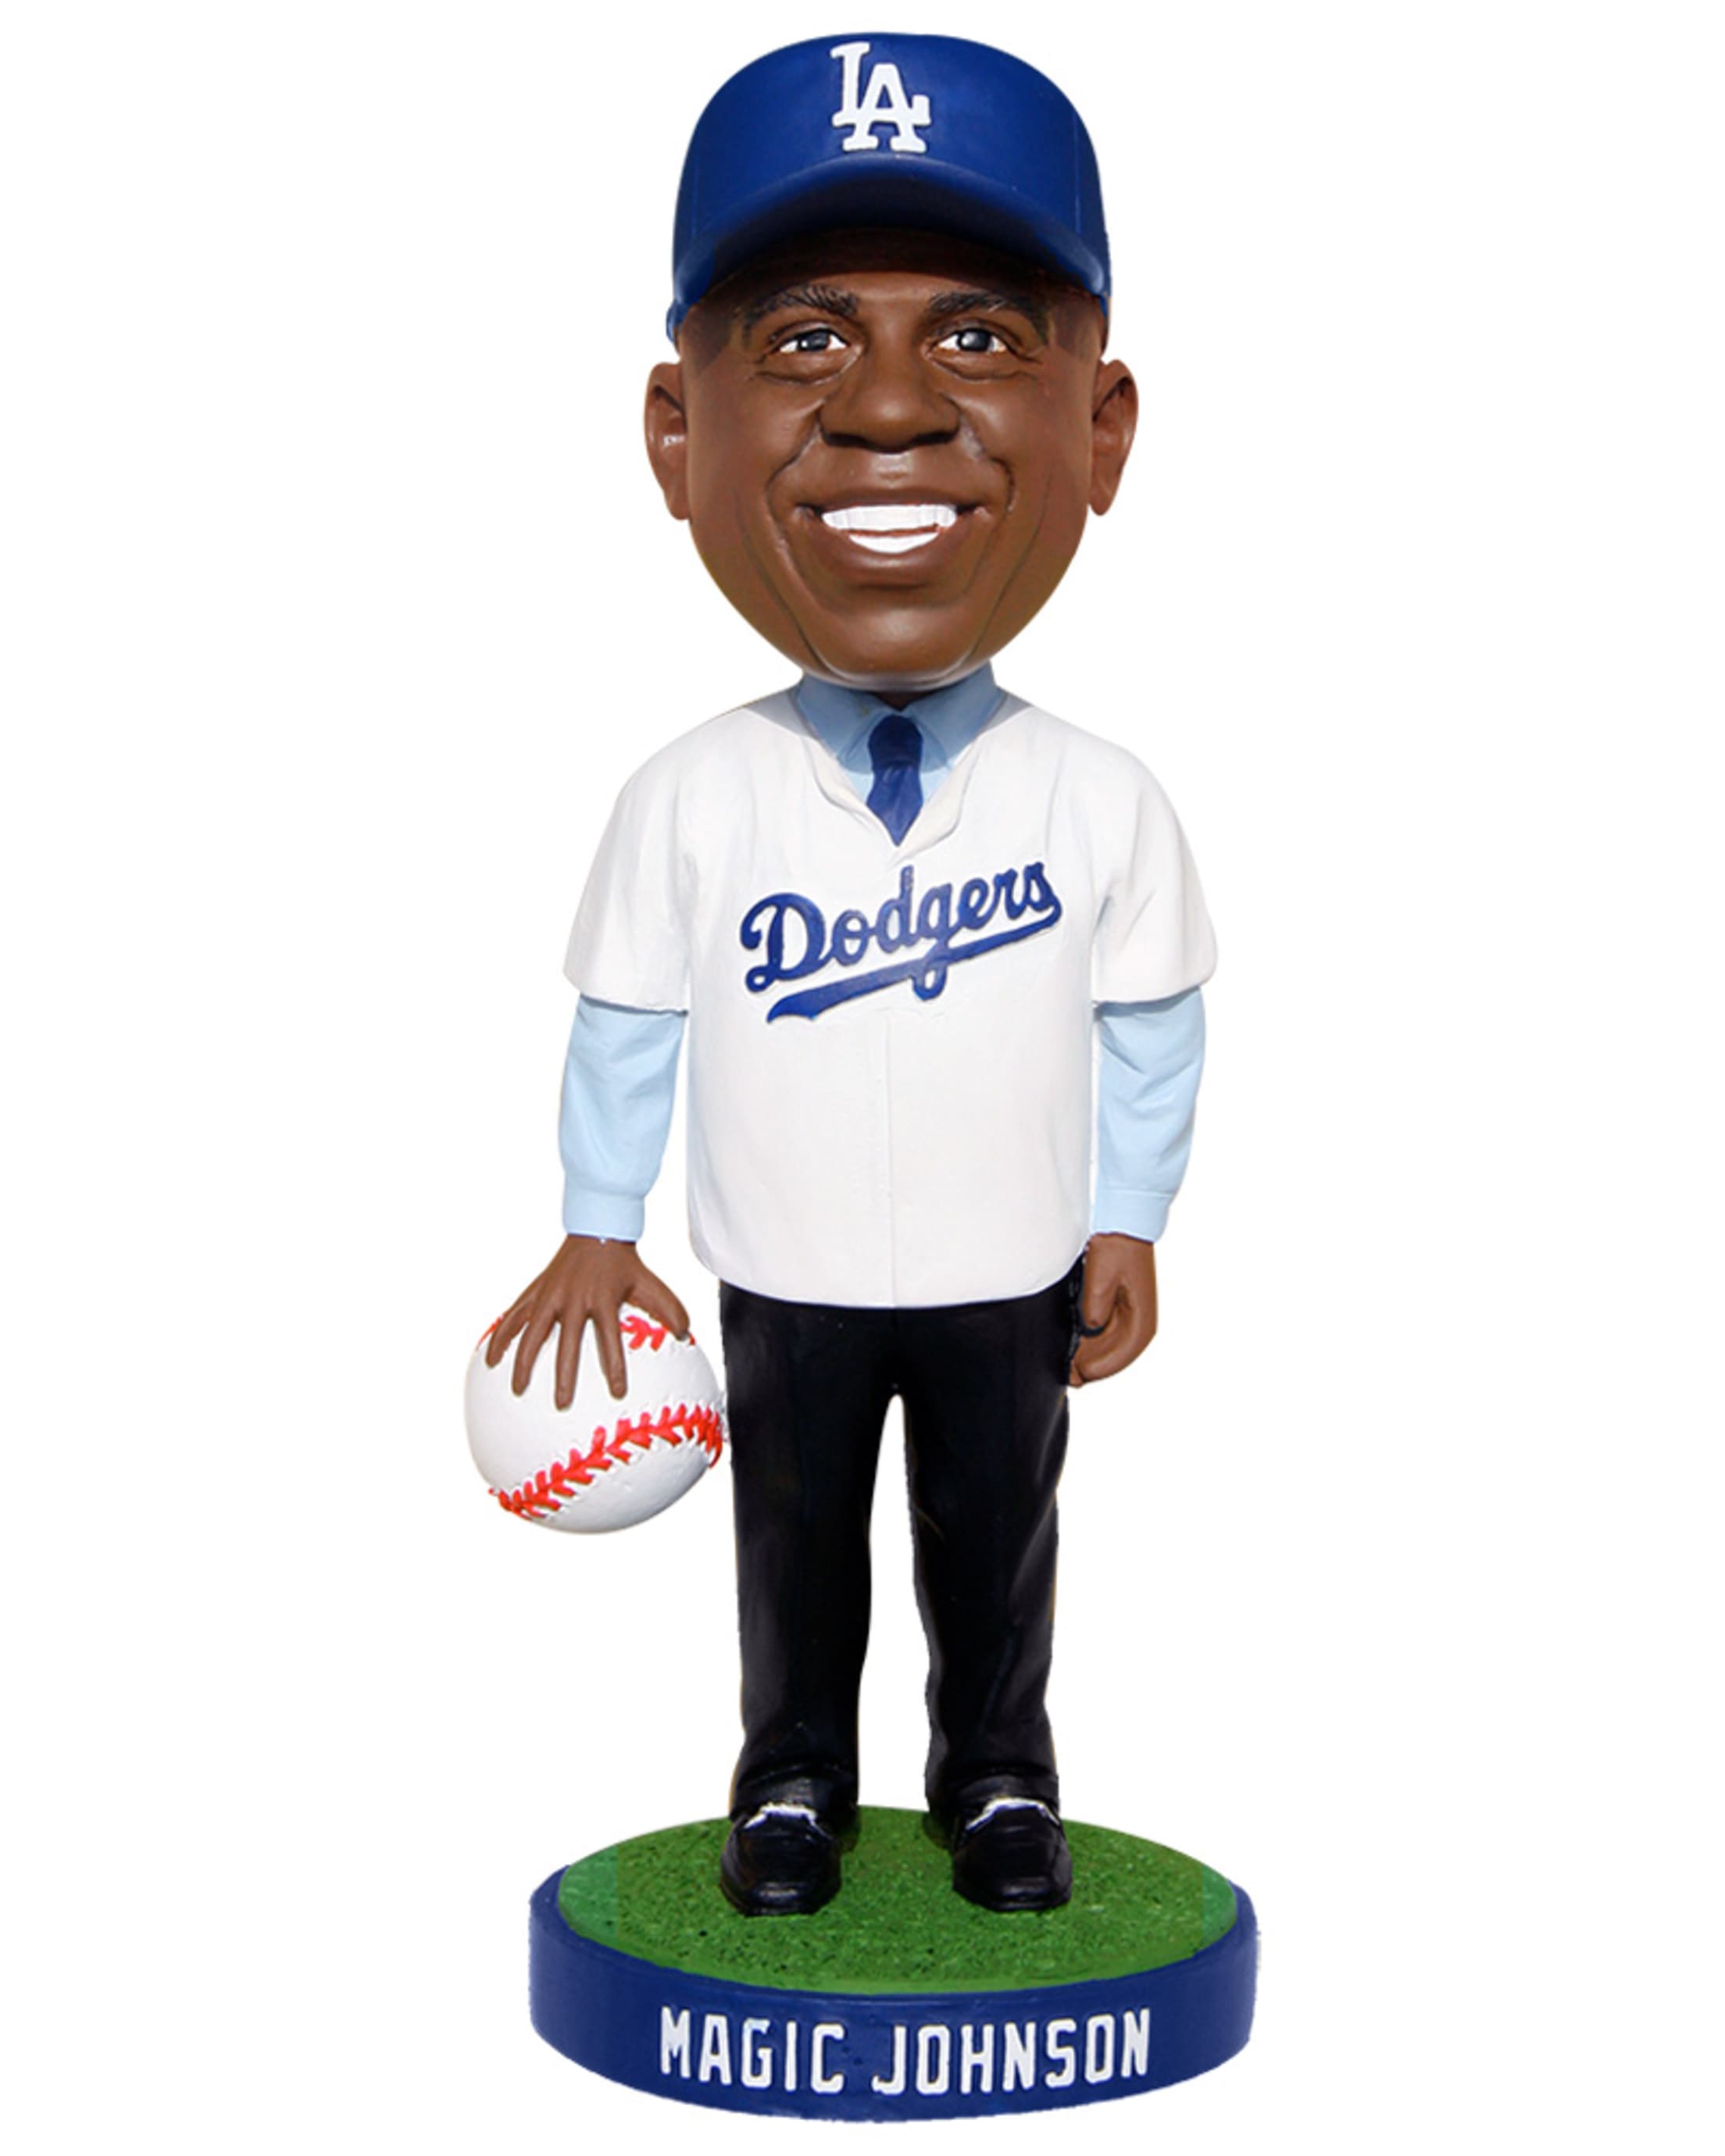 2022 Dodgers bobbleheads, Taco Tuesday nights & more Dodger